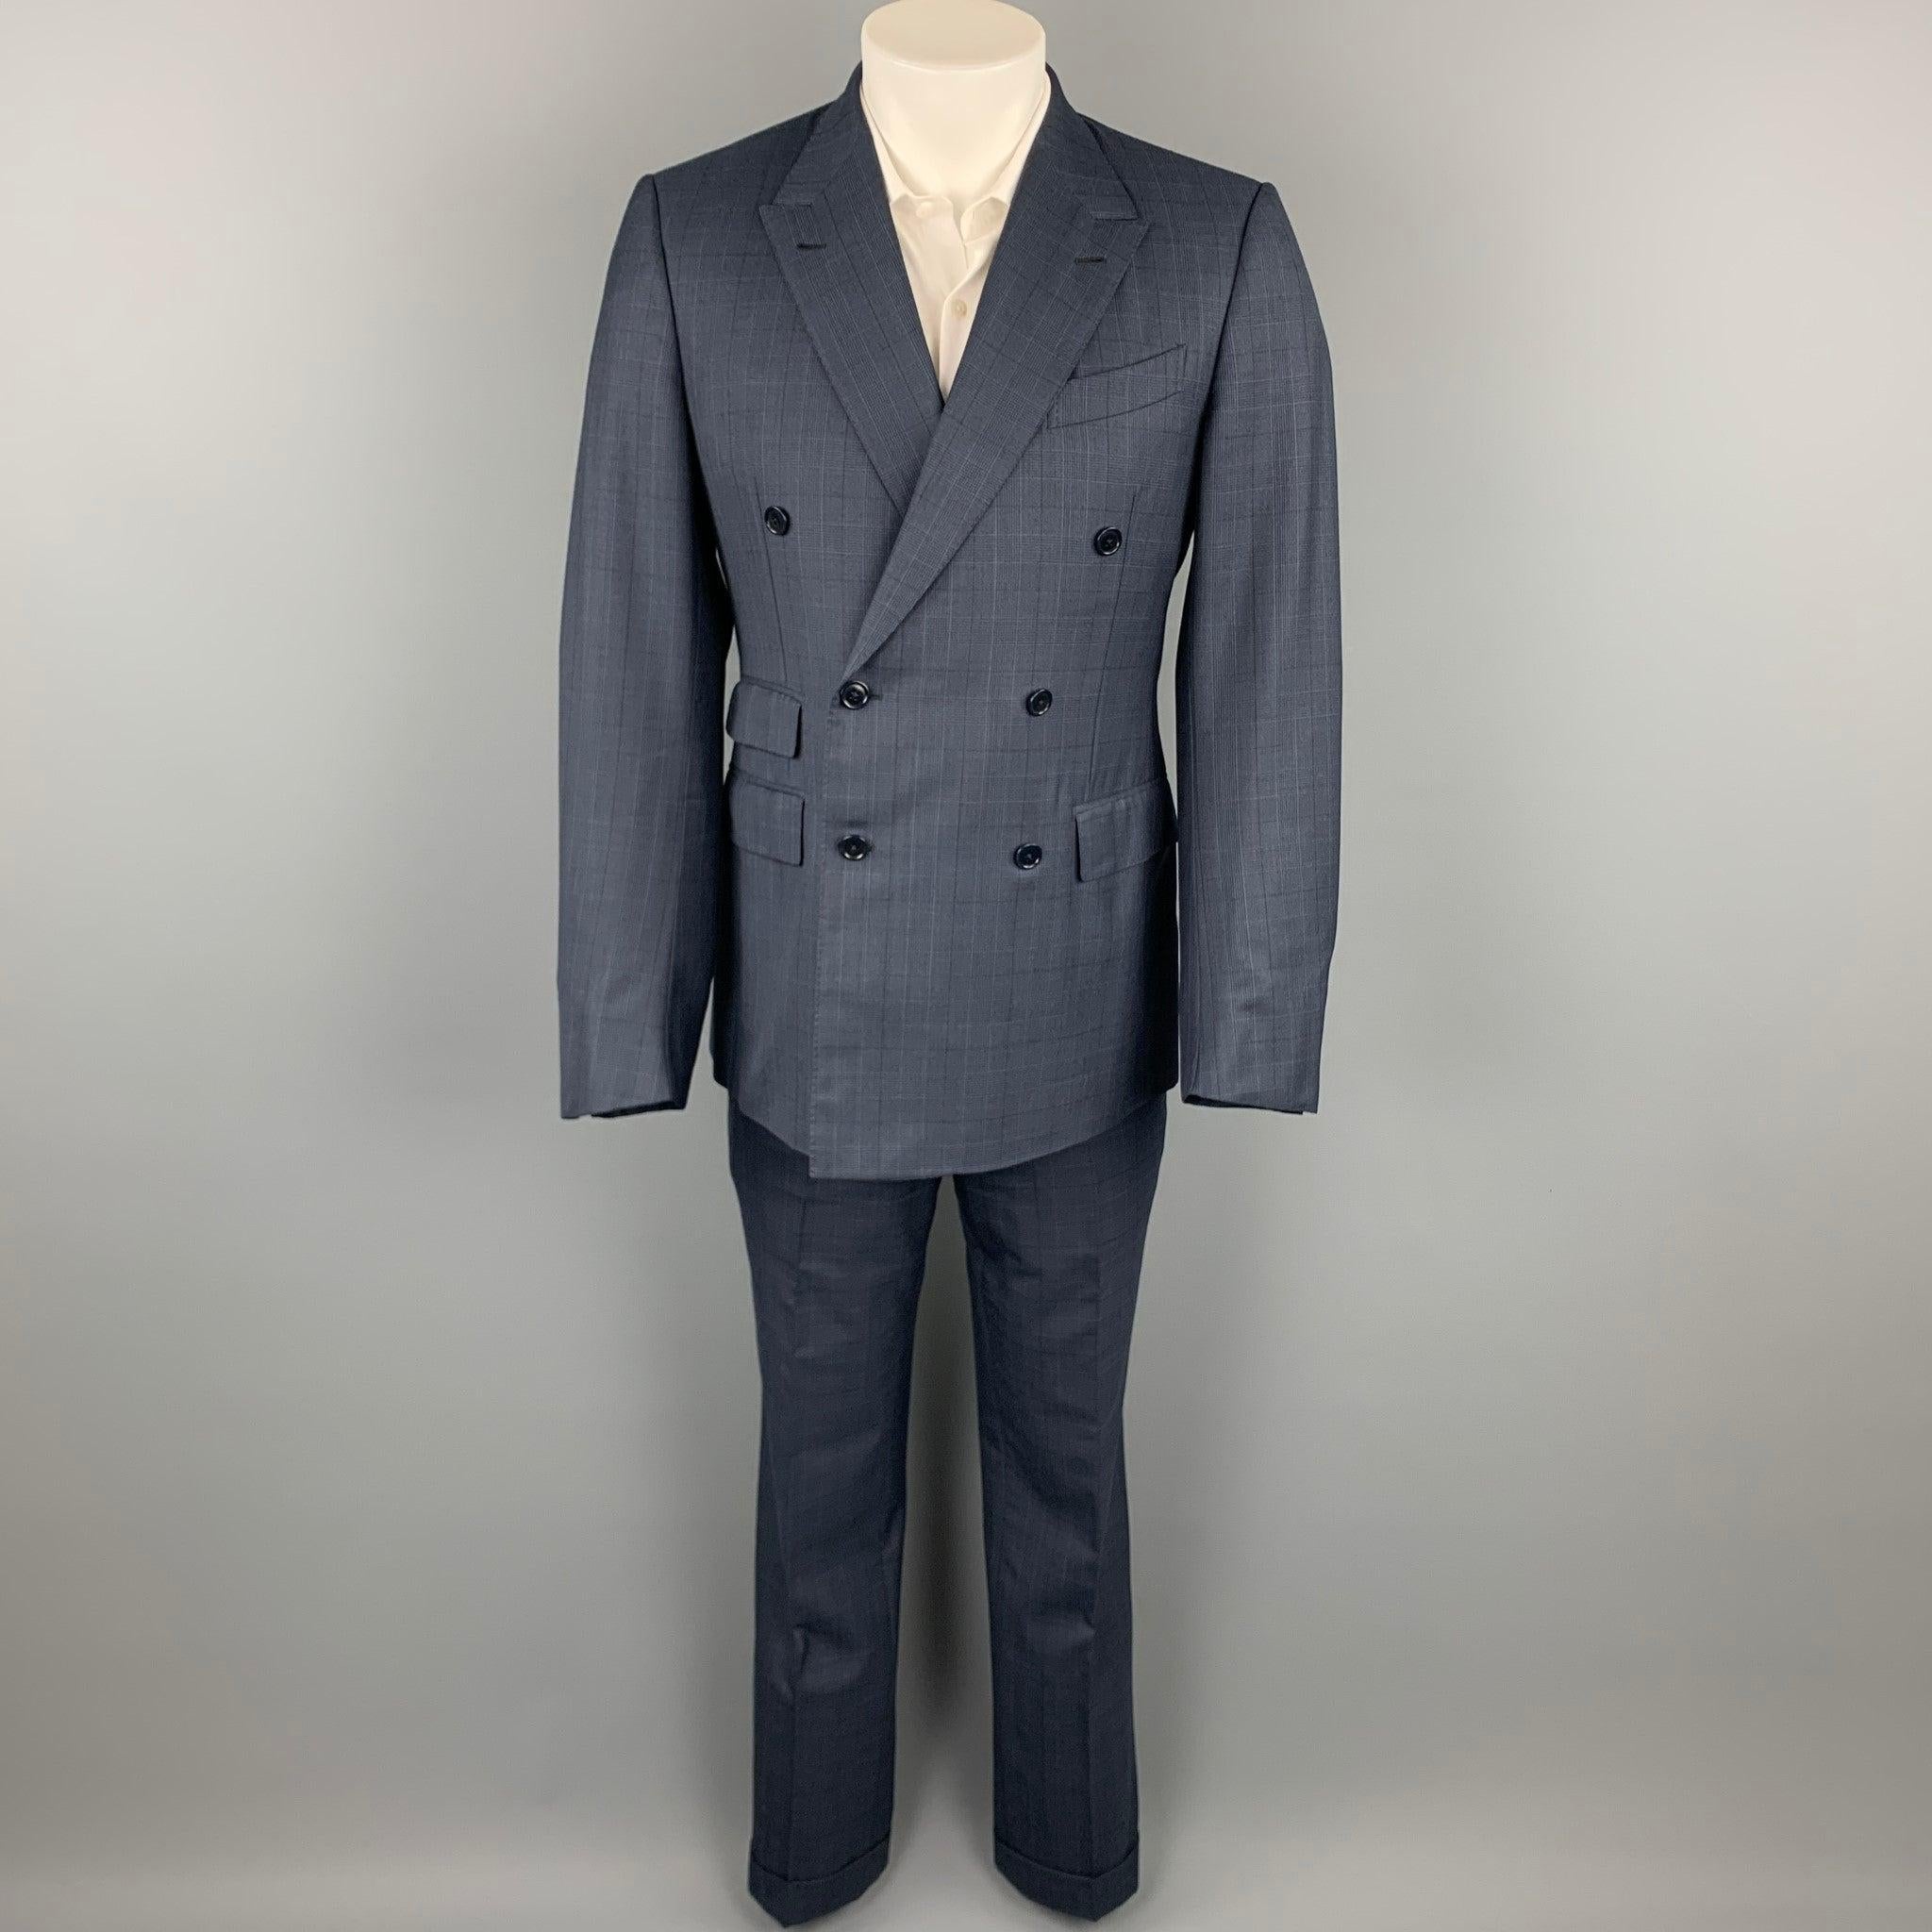 ERMENEGILDO ZEGNA custom
suit comes in a navy glenplaid wool / silk with a full liner and includes a double breasted sport coat with a peak lapel and matching flat front trousers. Very Good Pre-Owned Condition. 

Marked:   50 

Measurements: 
 